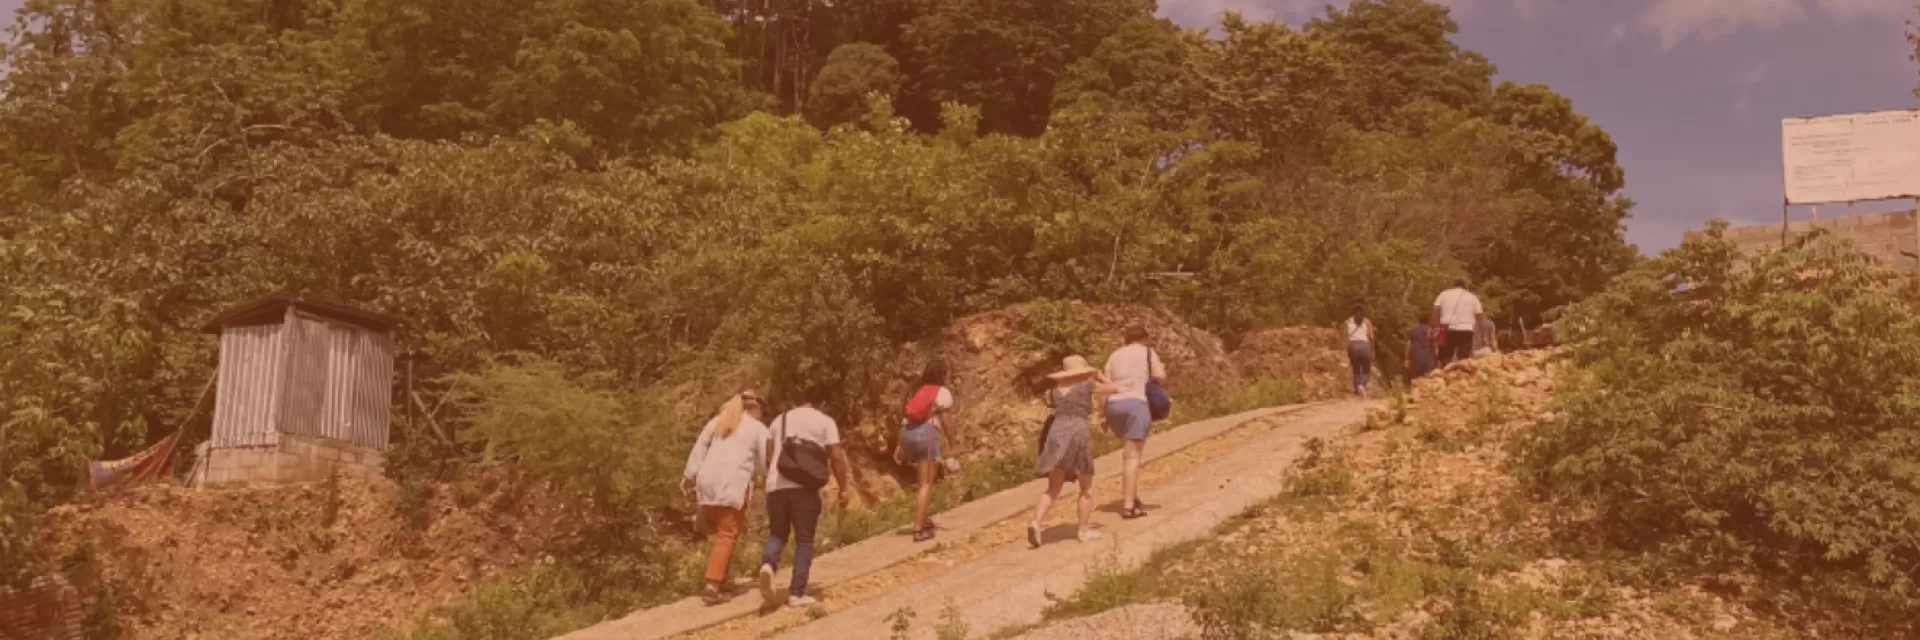 People hiking up a hill.